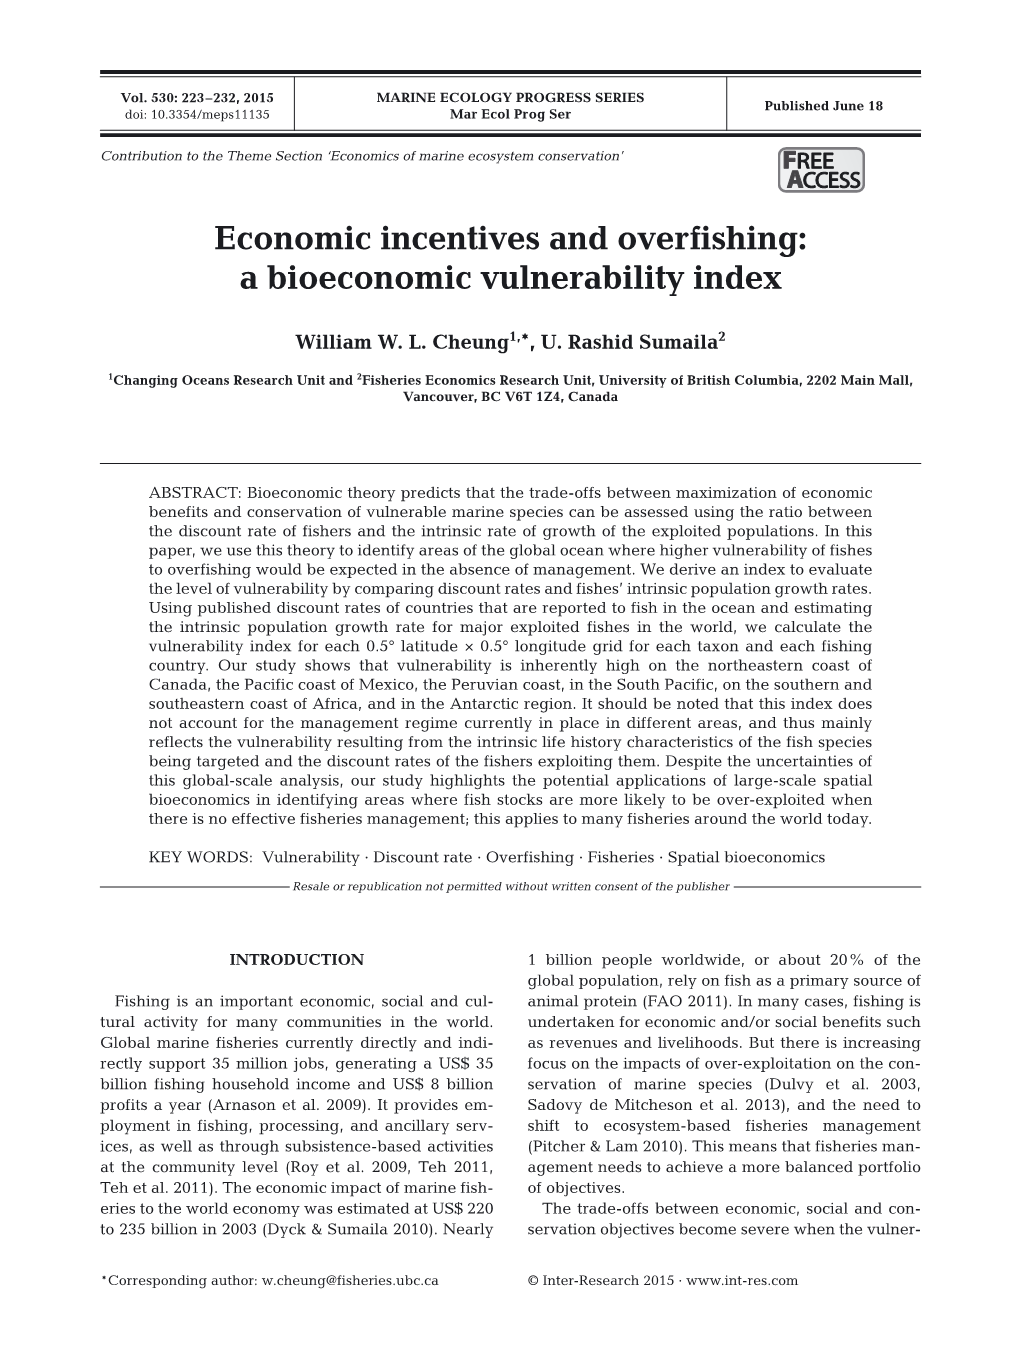 Economic Incentives and Overfishing: a Bioeconomic Vulnerability Index